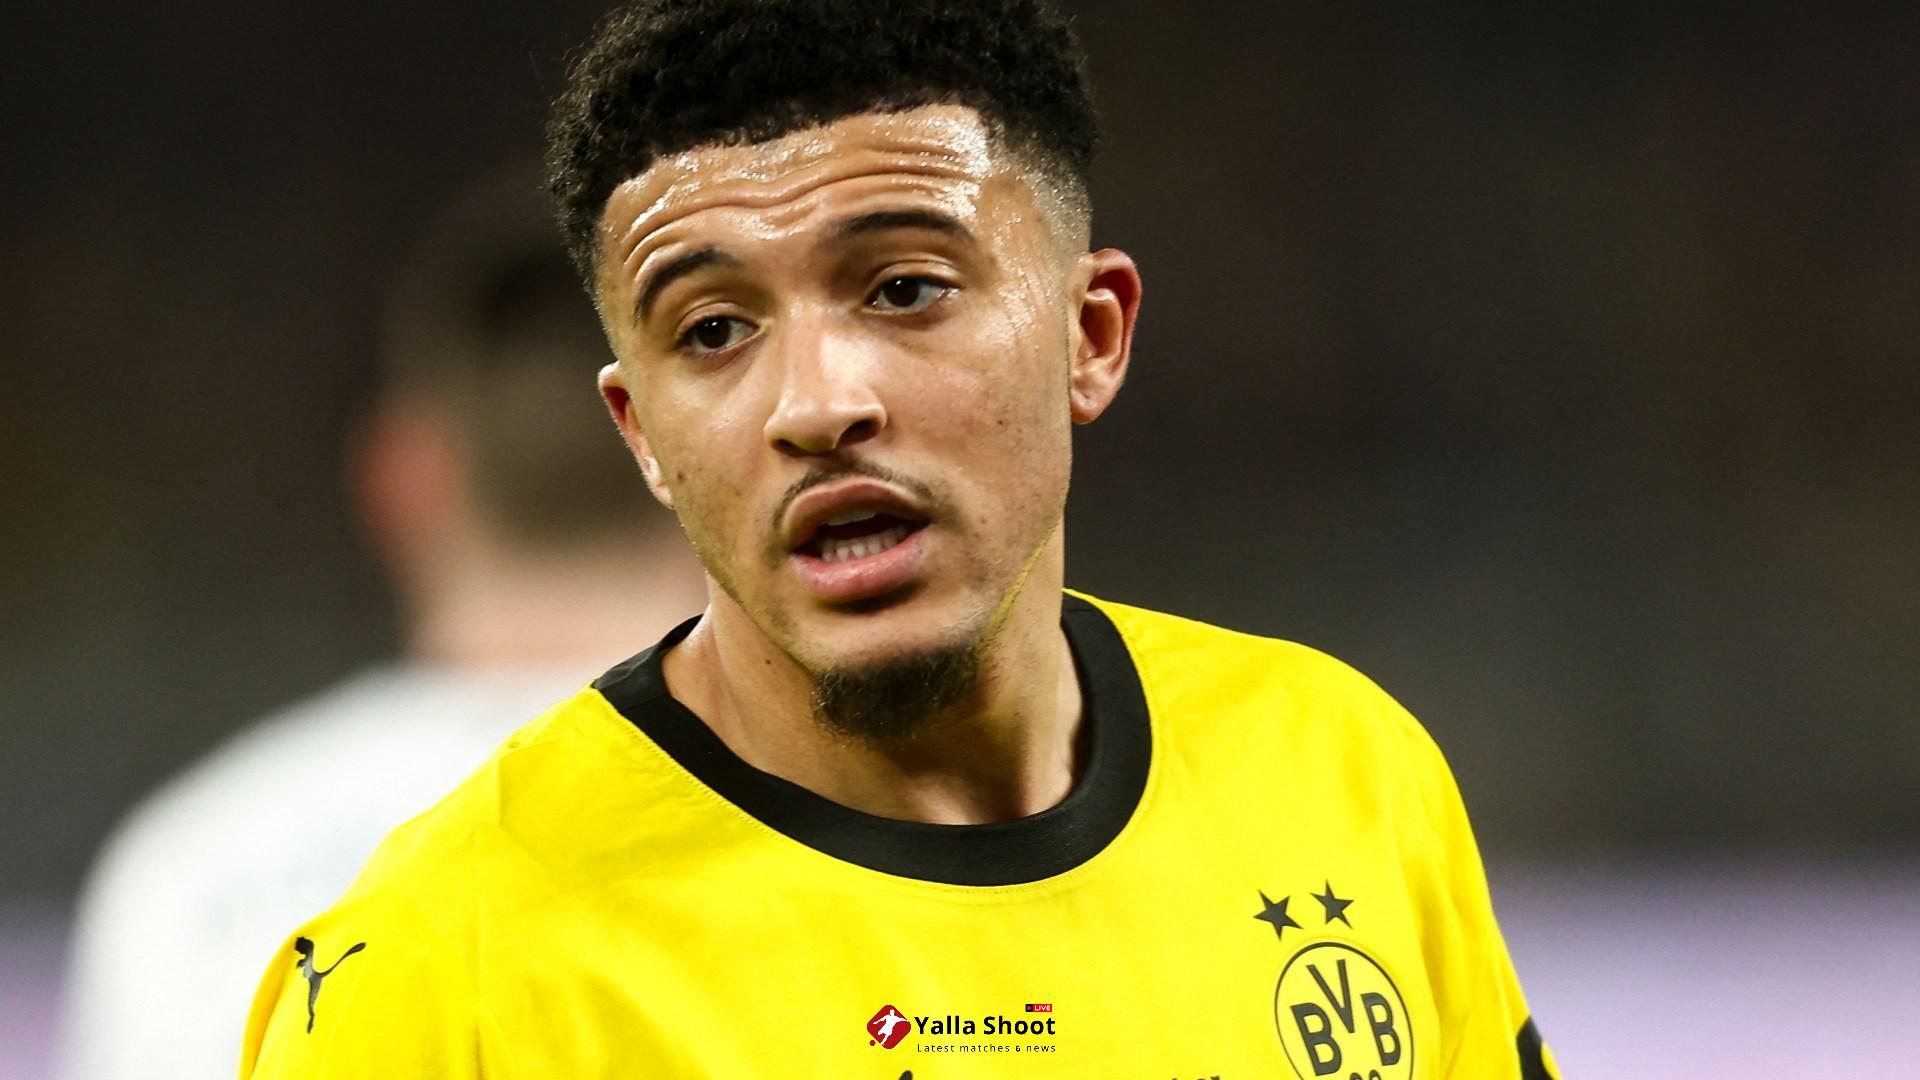 Man Utd transfer blow as Borussia Dortmund admit signing Sancho permanently will be 'very, very difficult'